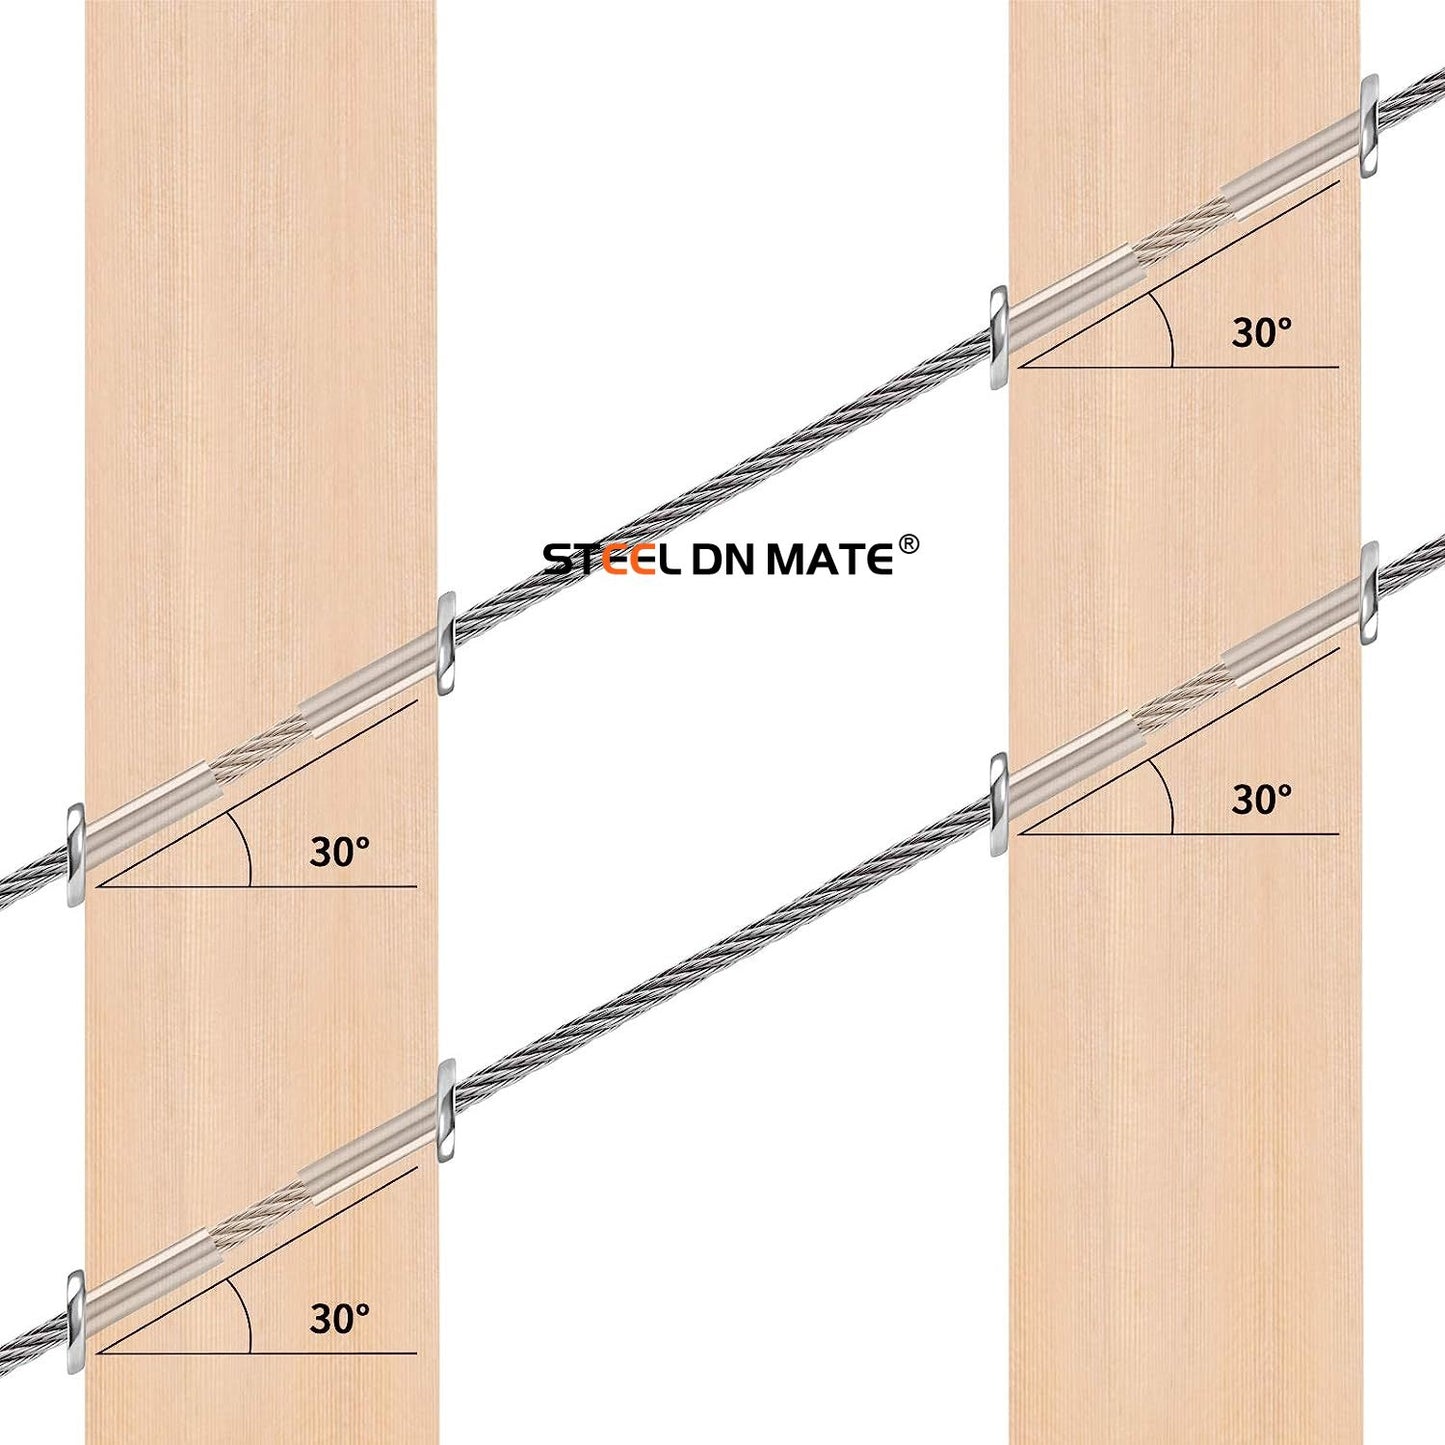 Steel DN Mate 30 Pack T316 Marine Grade Stainless Steel 30 Degree Angle Beveled Protector Sleeves, Wood Post Protector Sleeve for 1/8" Deck Cable Railing kit with a Drill Bit, DIY Balustrade DT03